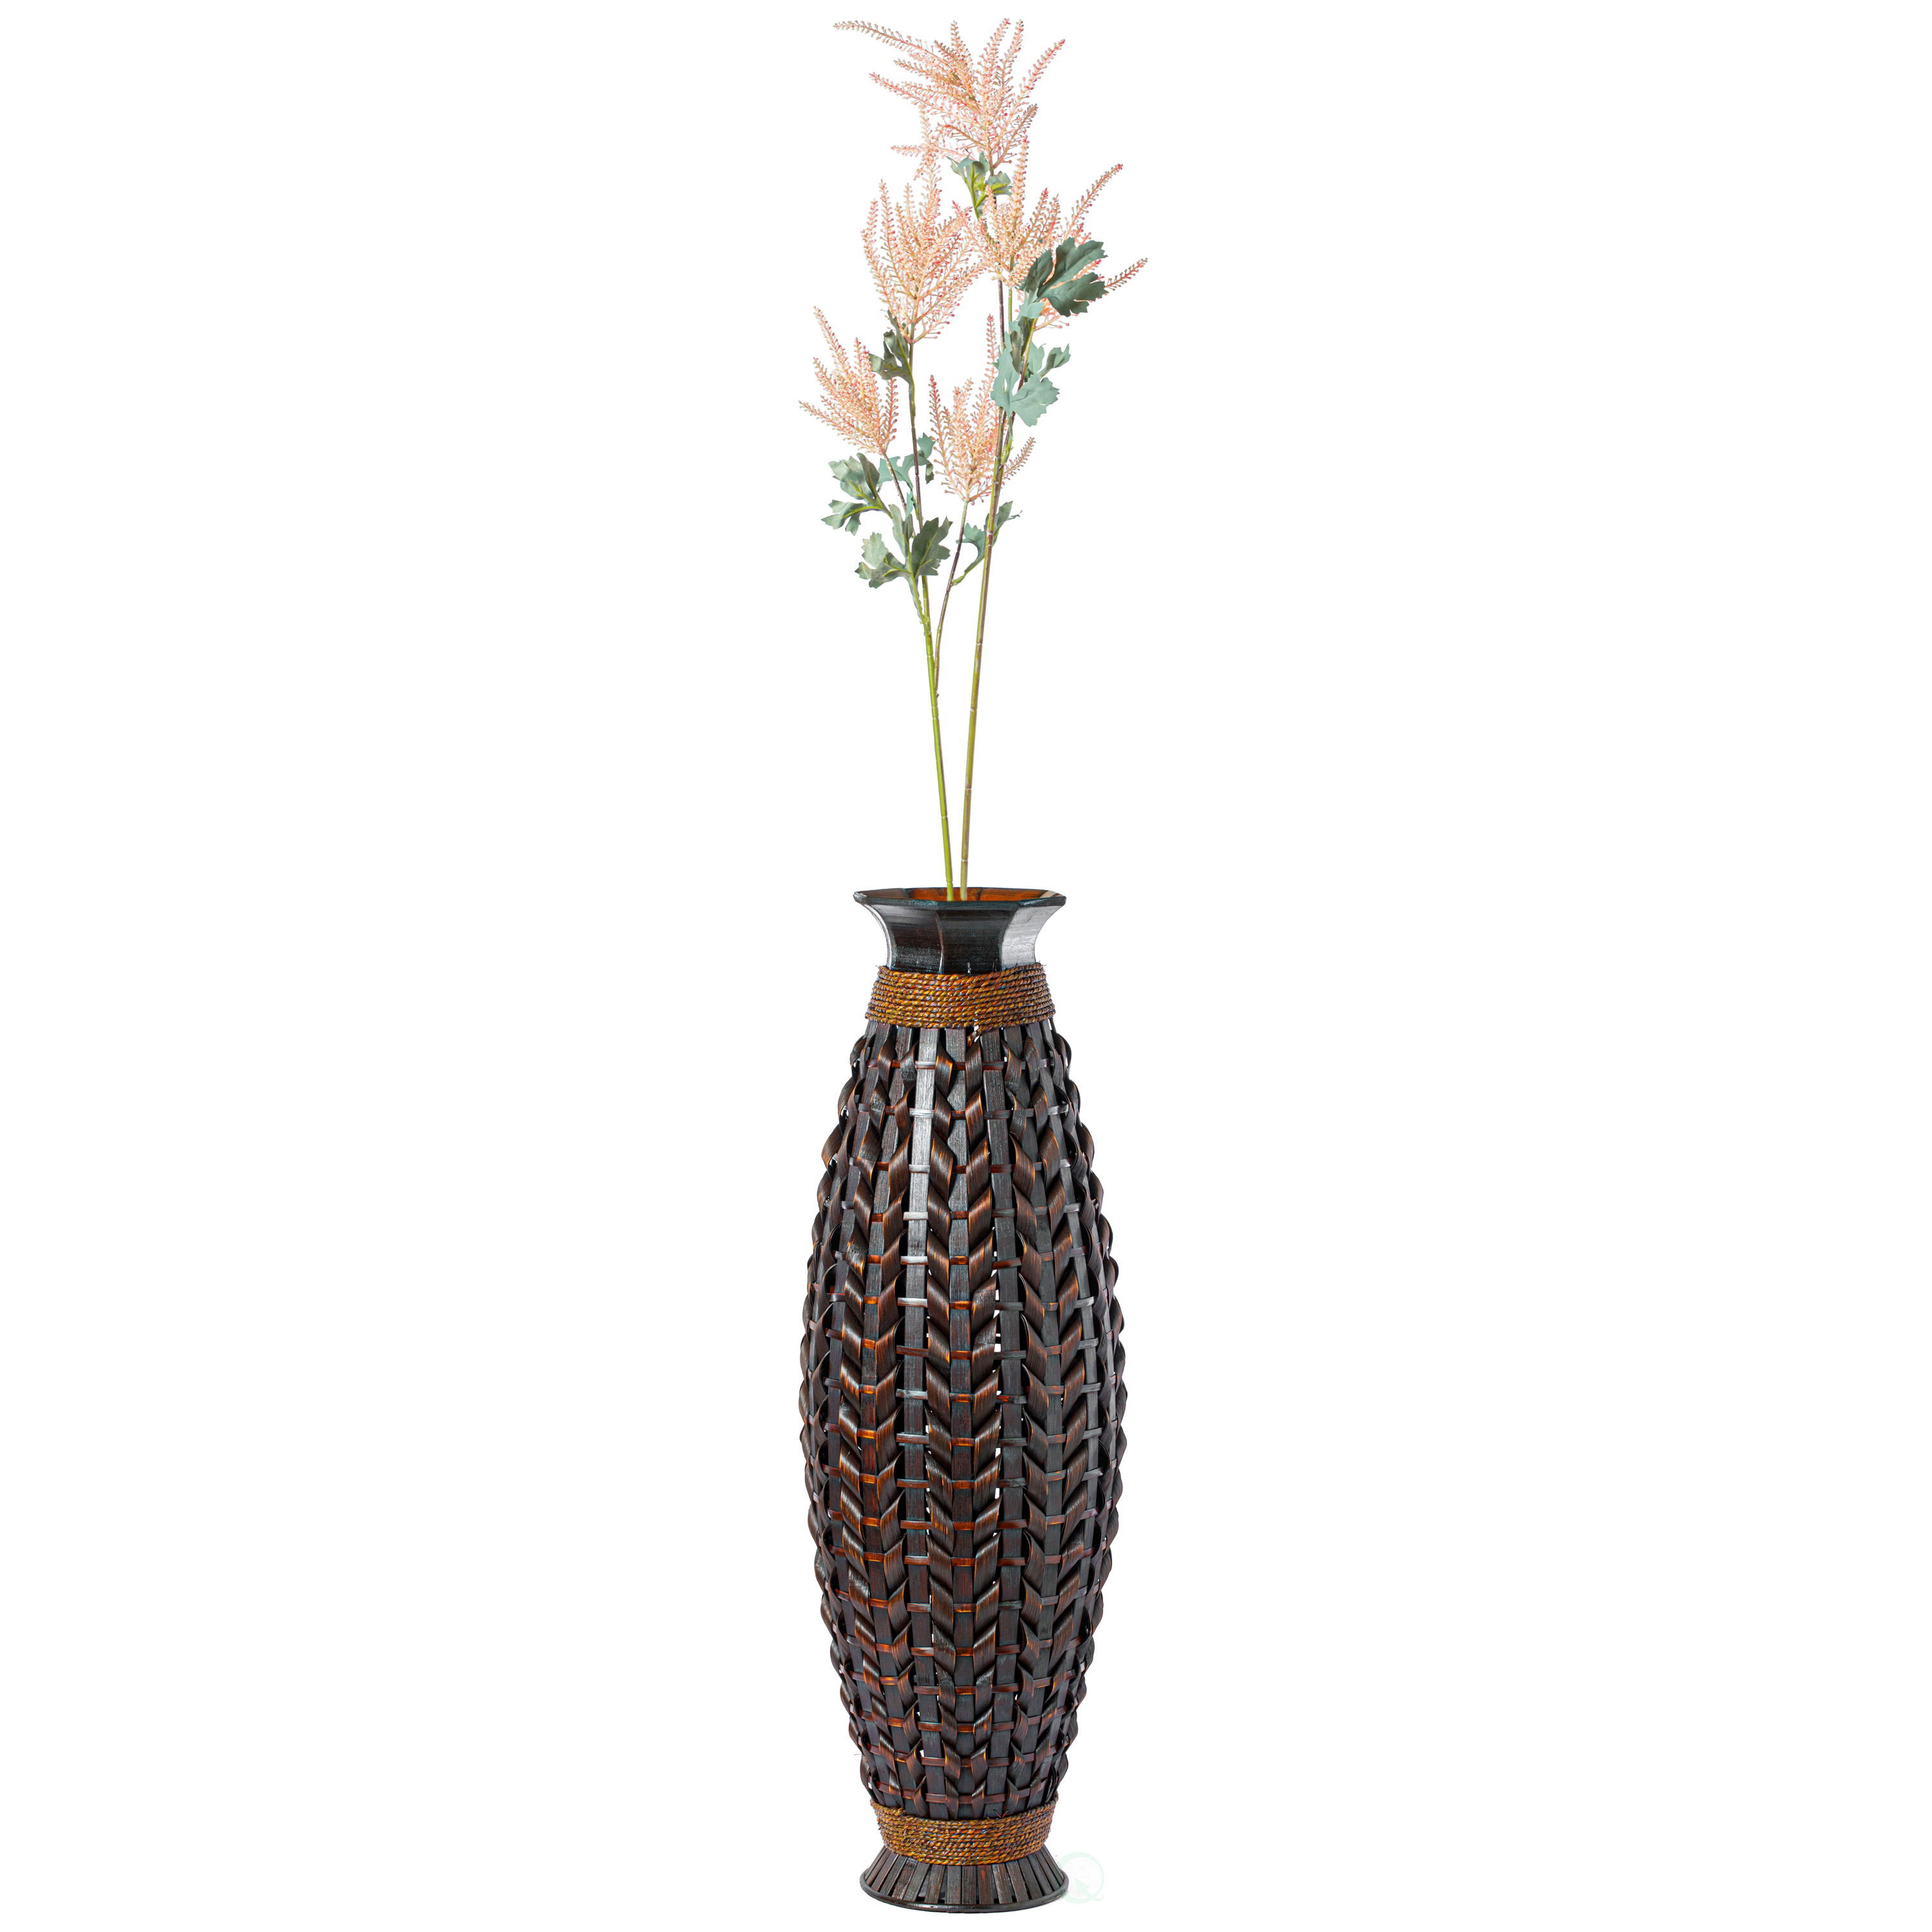 Tall Bamboo Floor Standing Vase With Wicker Woven Design 39 Inch High